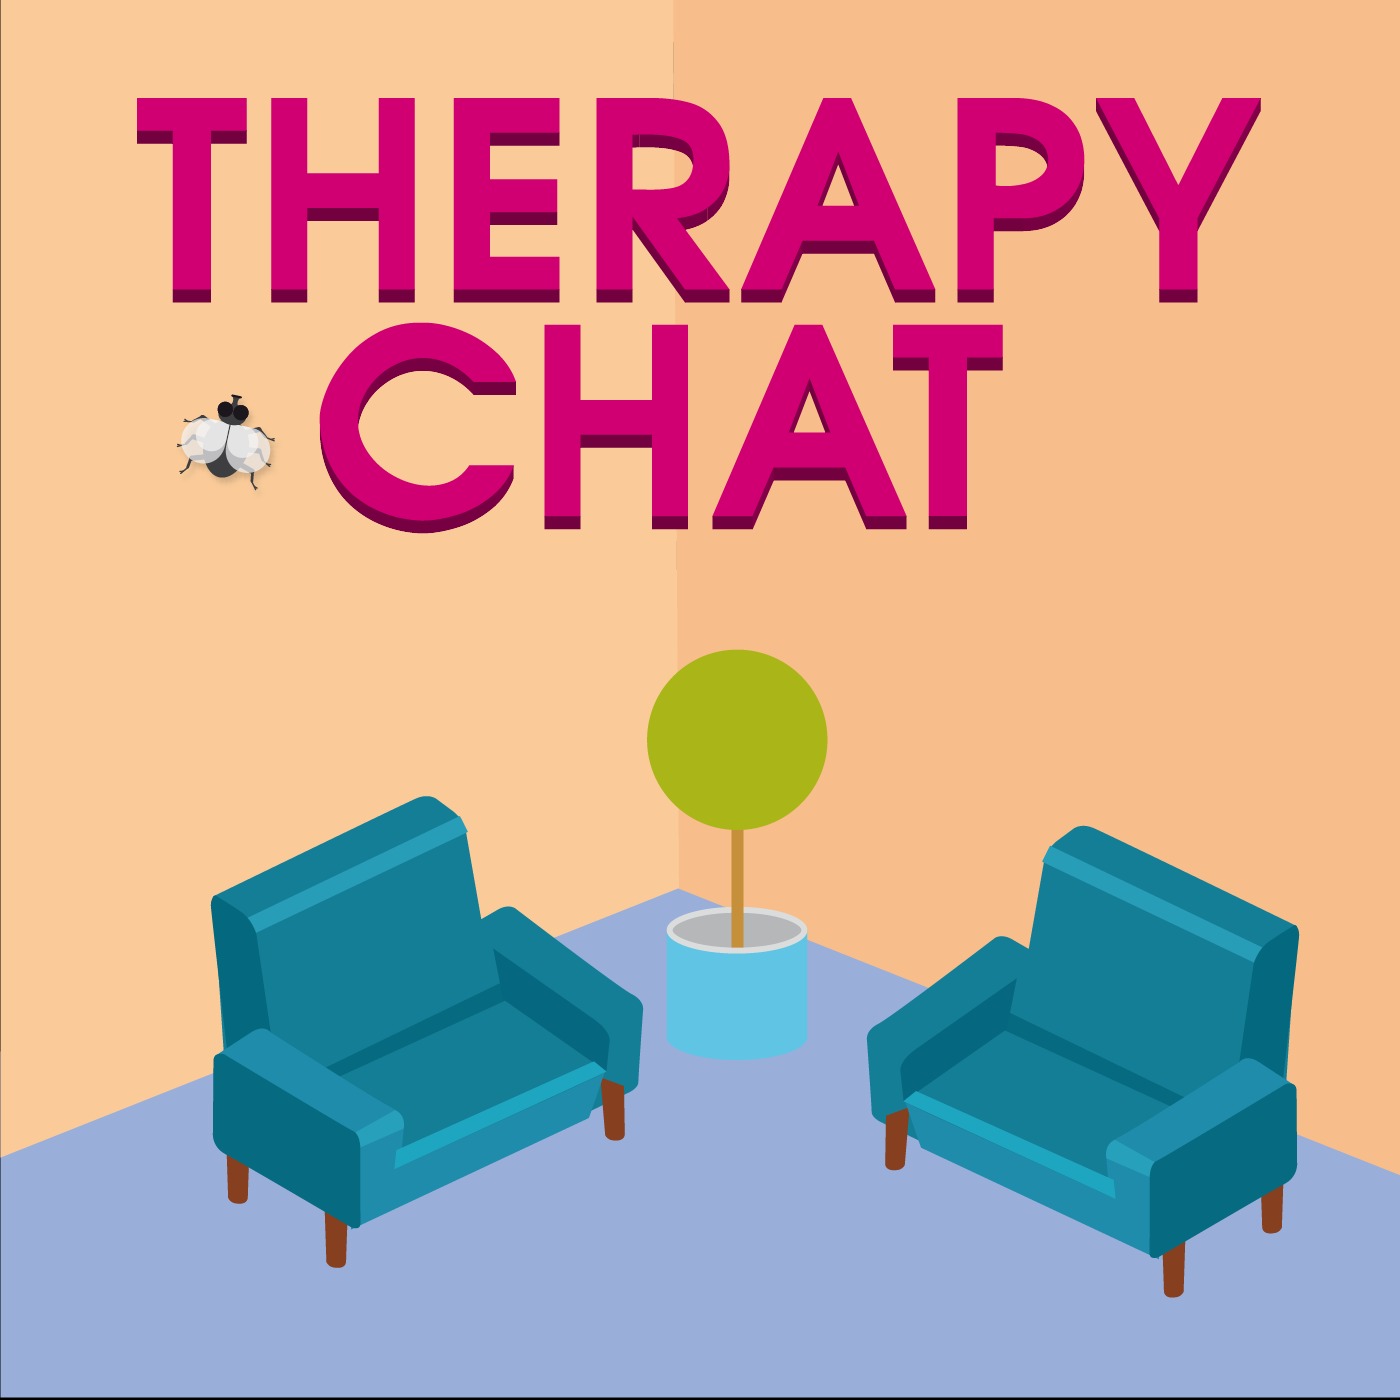 49: Benefits of Podcasting for Therapists